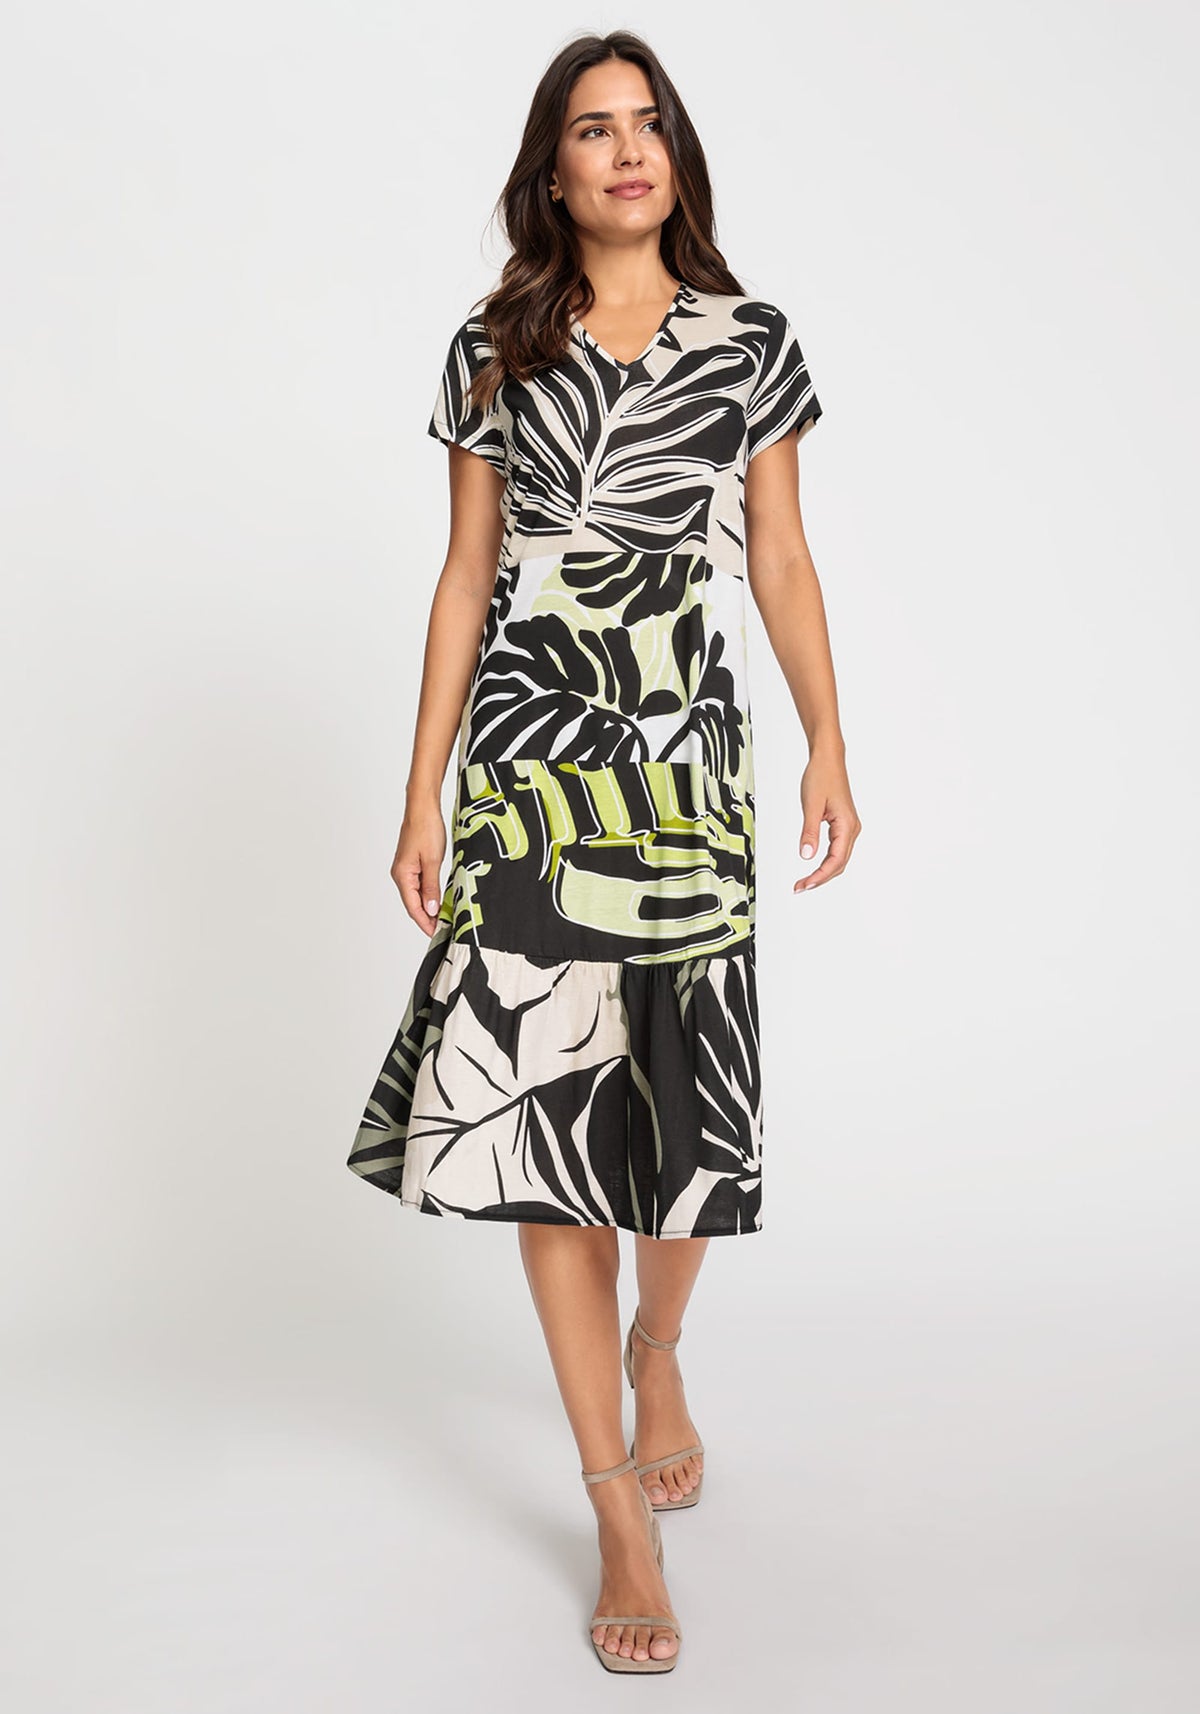 Short Sleeve Abstract Palm Print Dress containing TENCEL™ Modal